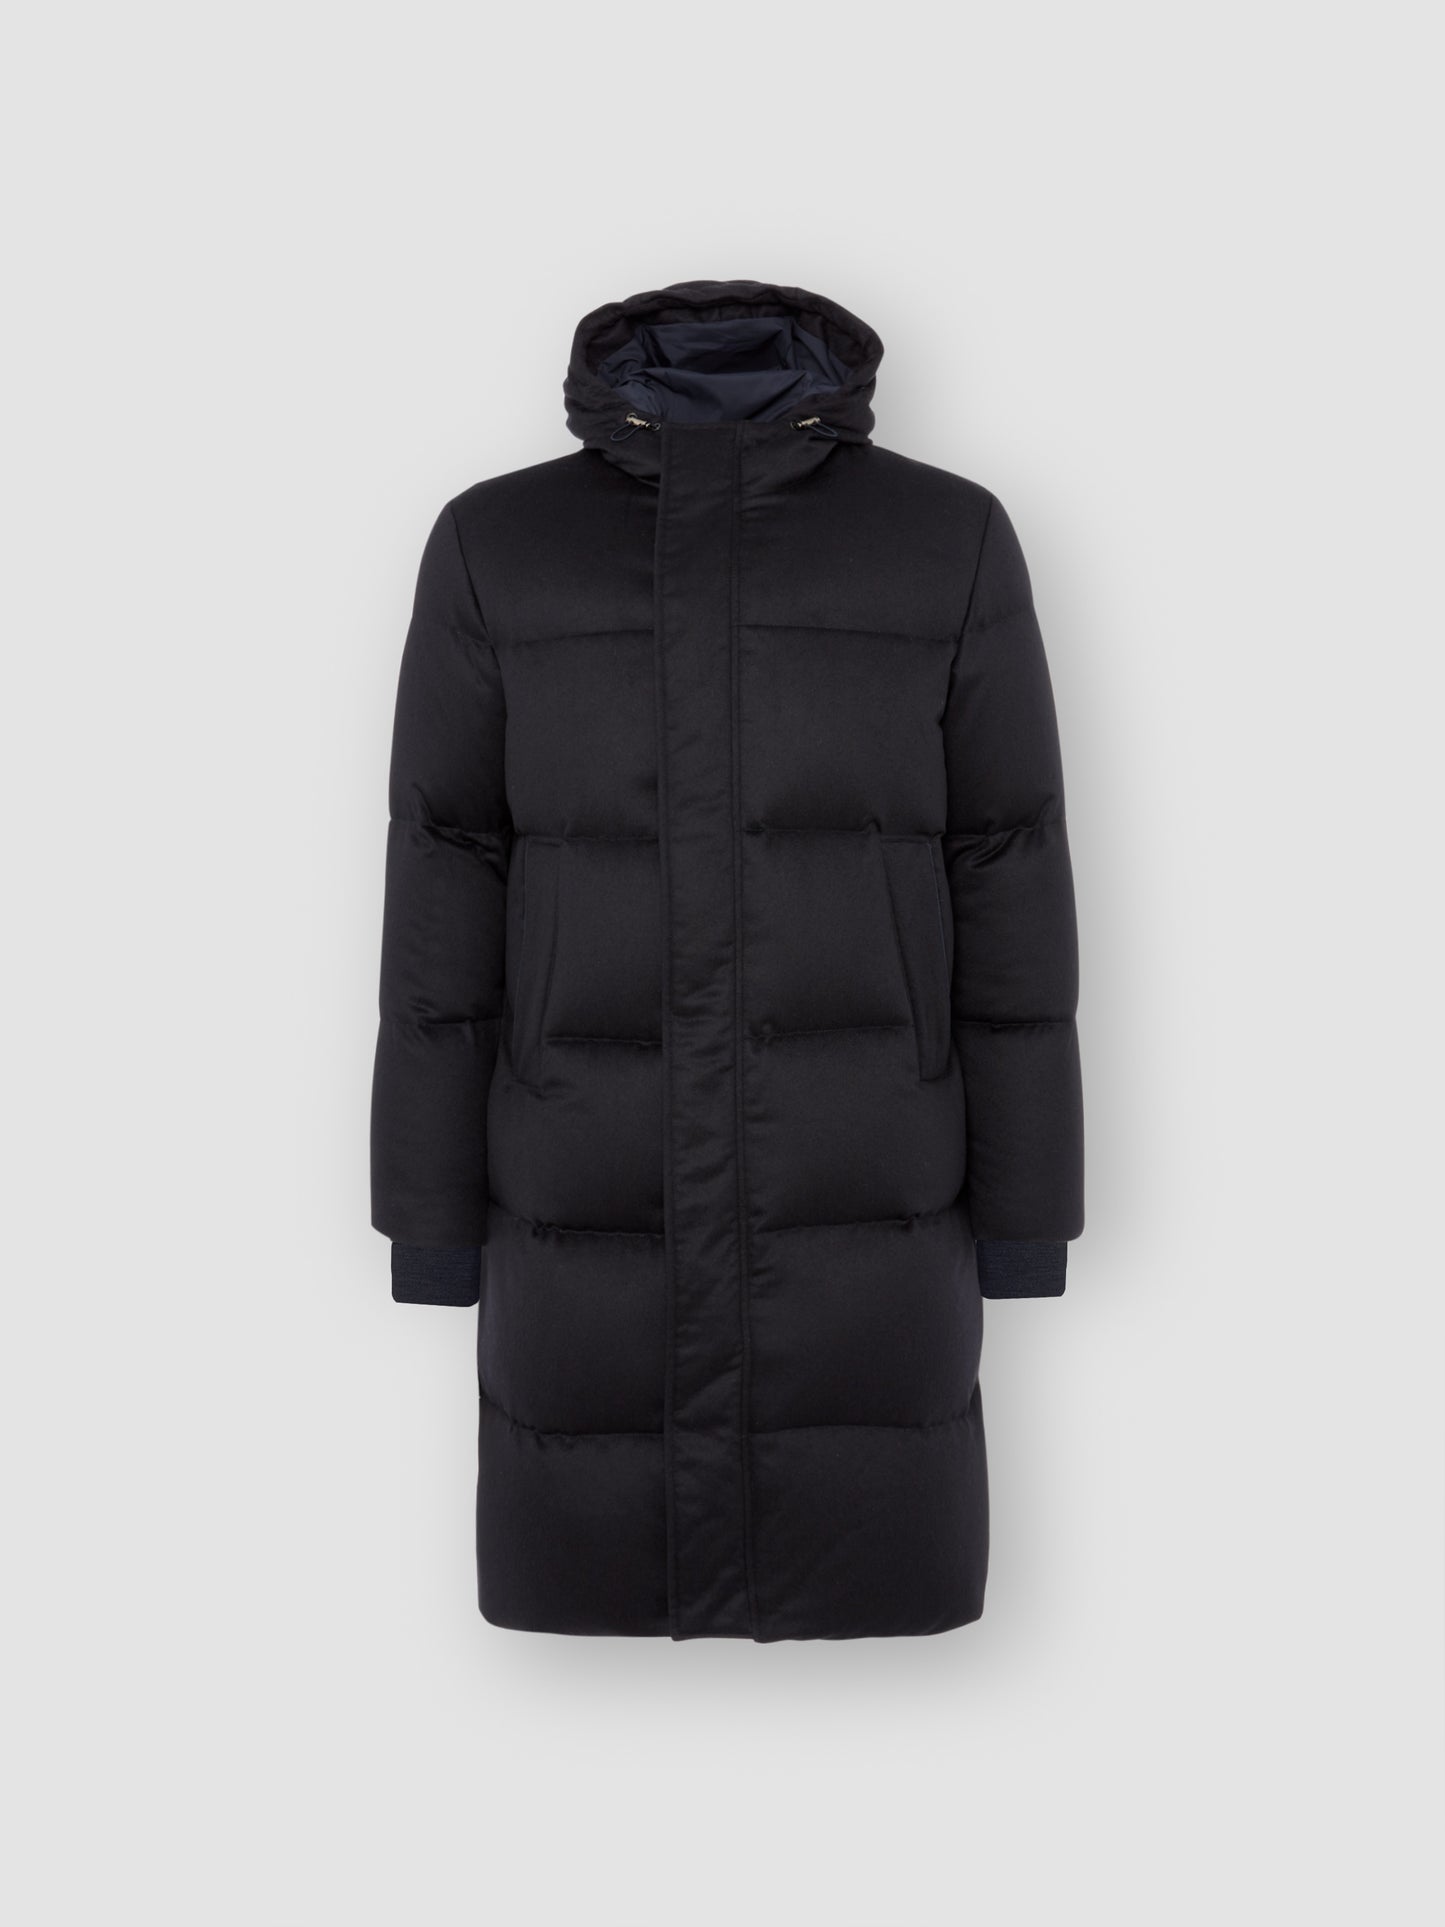 Cashmere Quilted Long Parka Navy Product Image